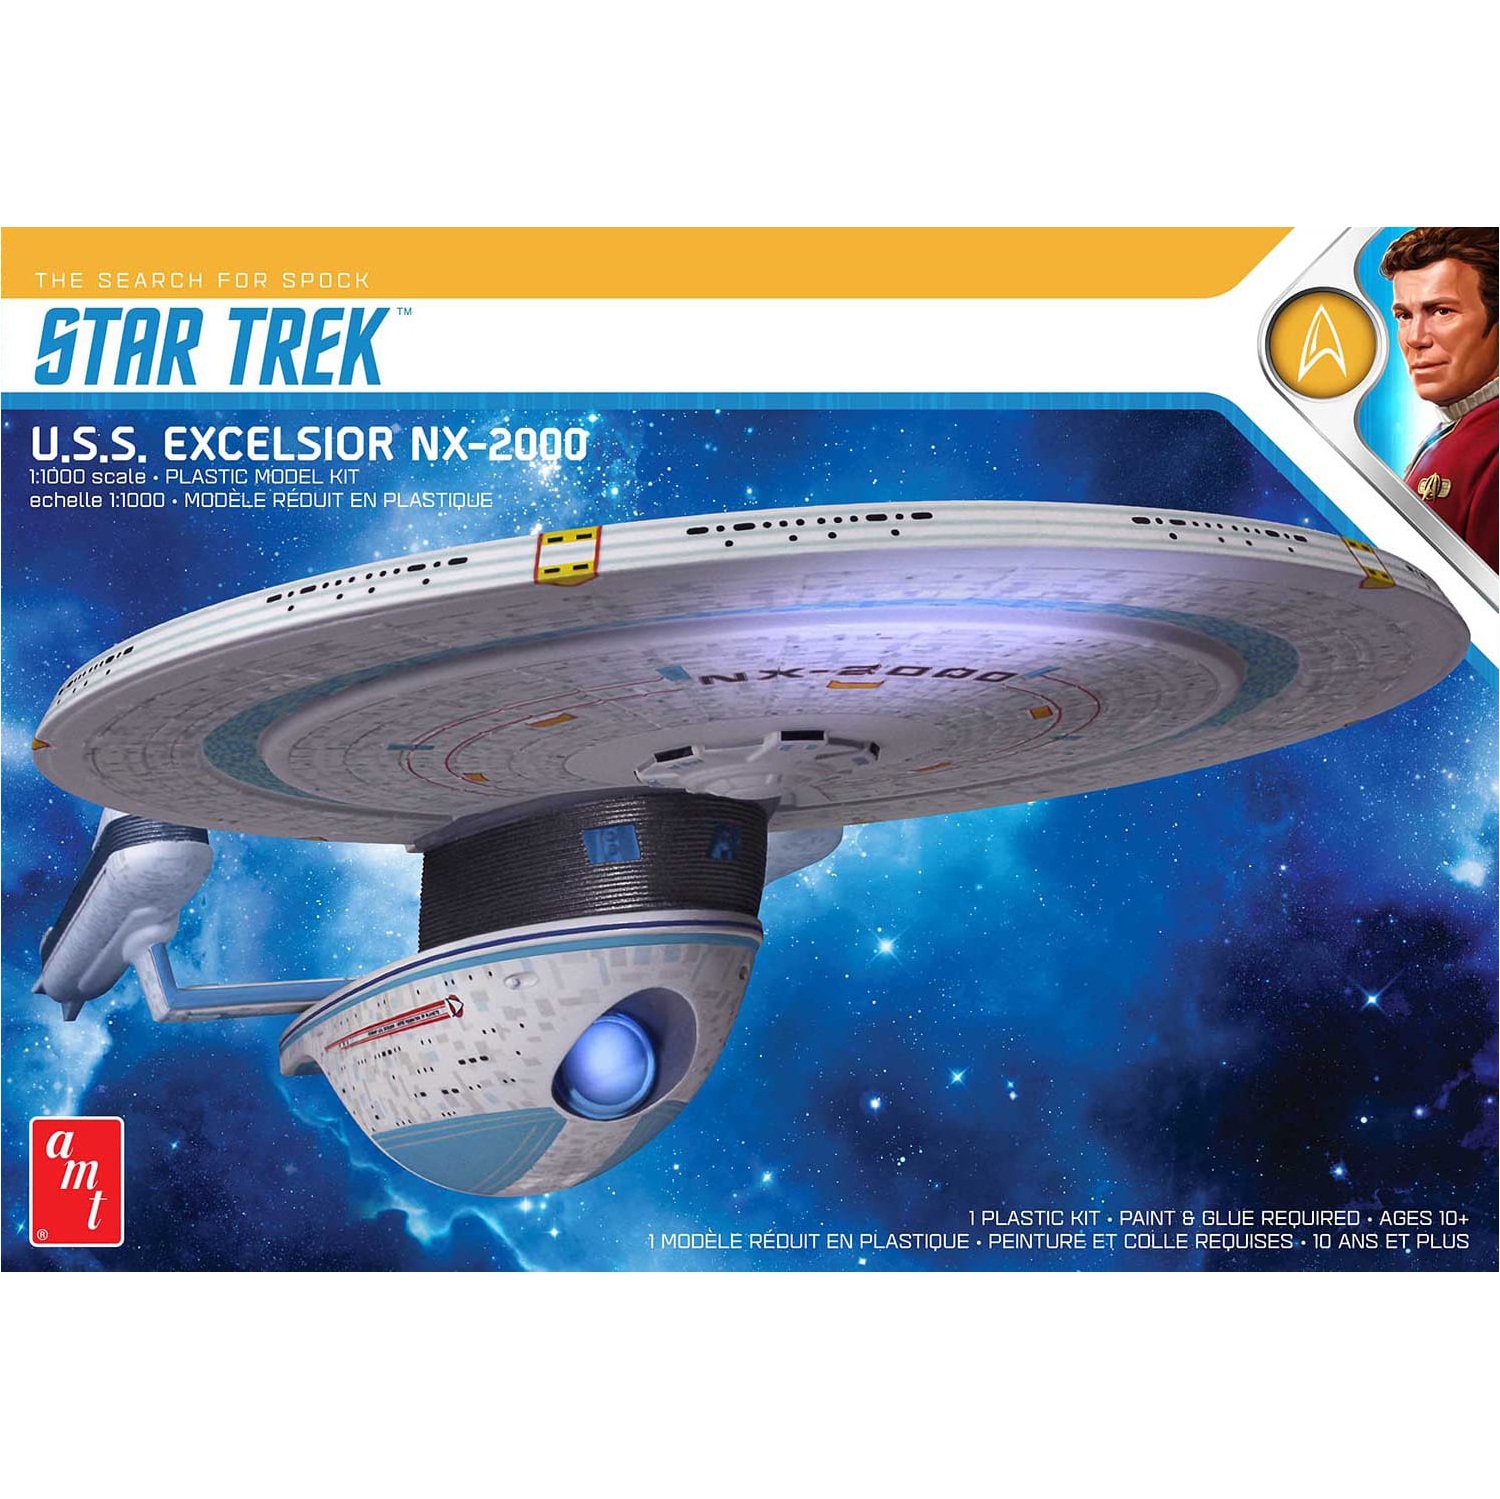 Star Trek: The Search for Spock - U.S.S. Excelsior NX-2000 (AMT1257) 1:1000 Scale Ship Plastic Model Kit